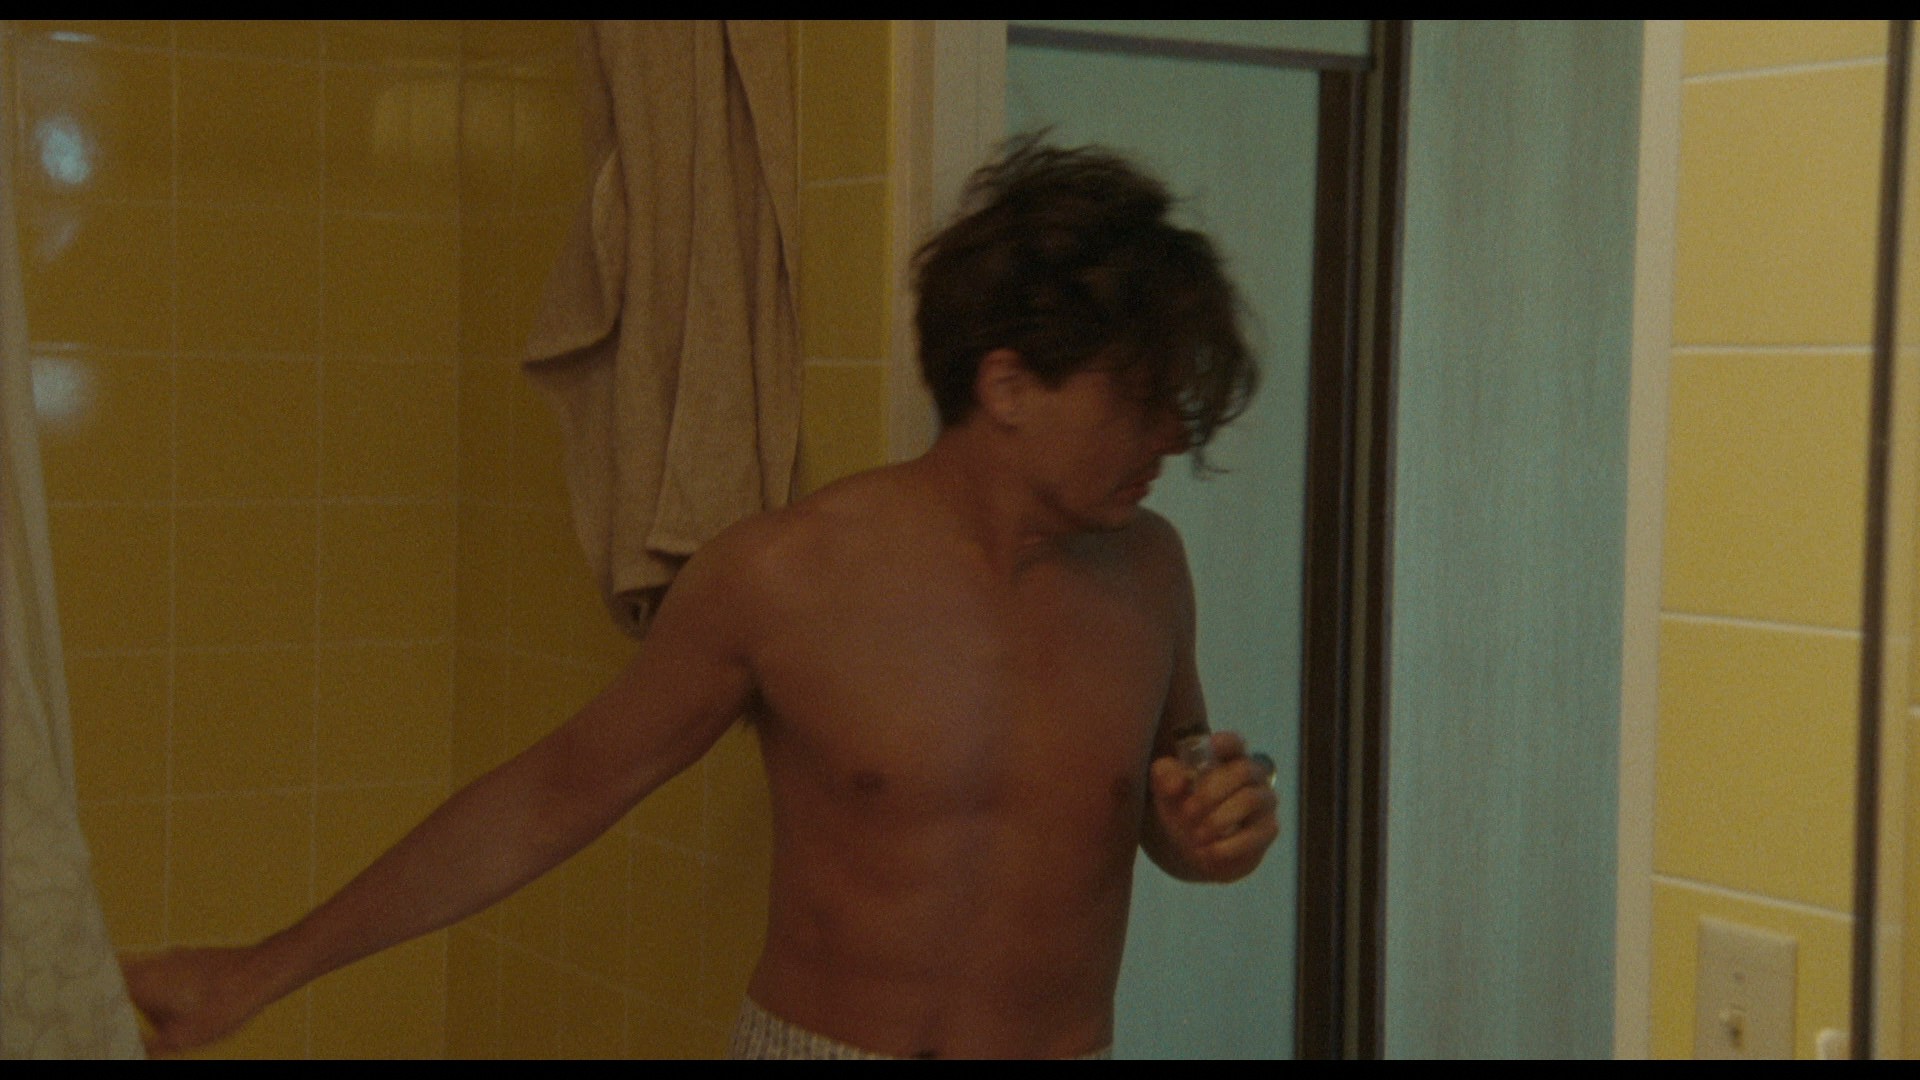 Here are some of the yummiest photos of Johnny's ass in the movie Priv...